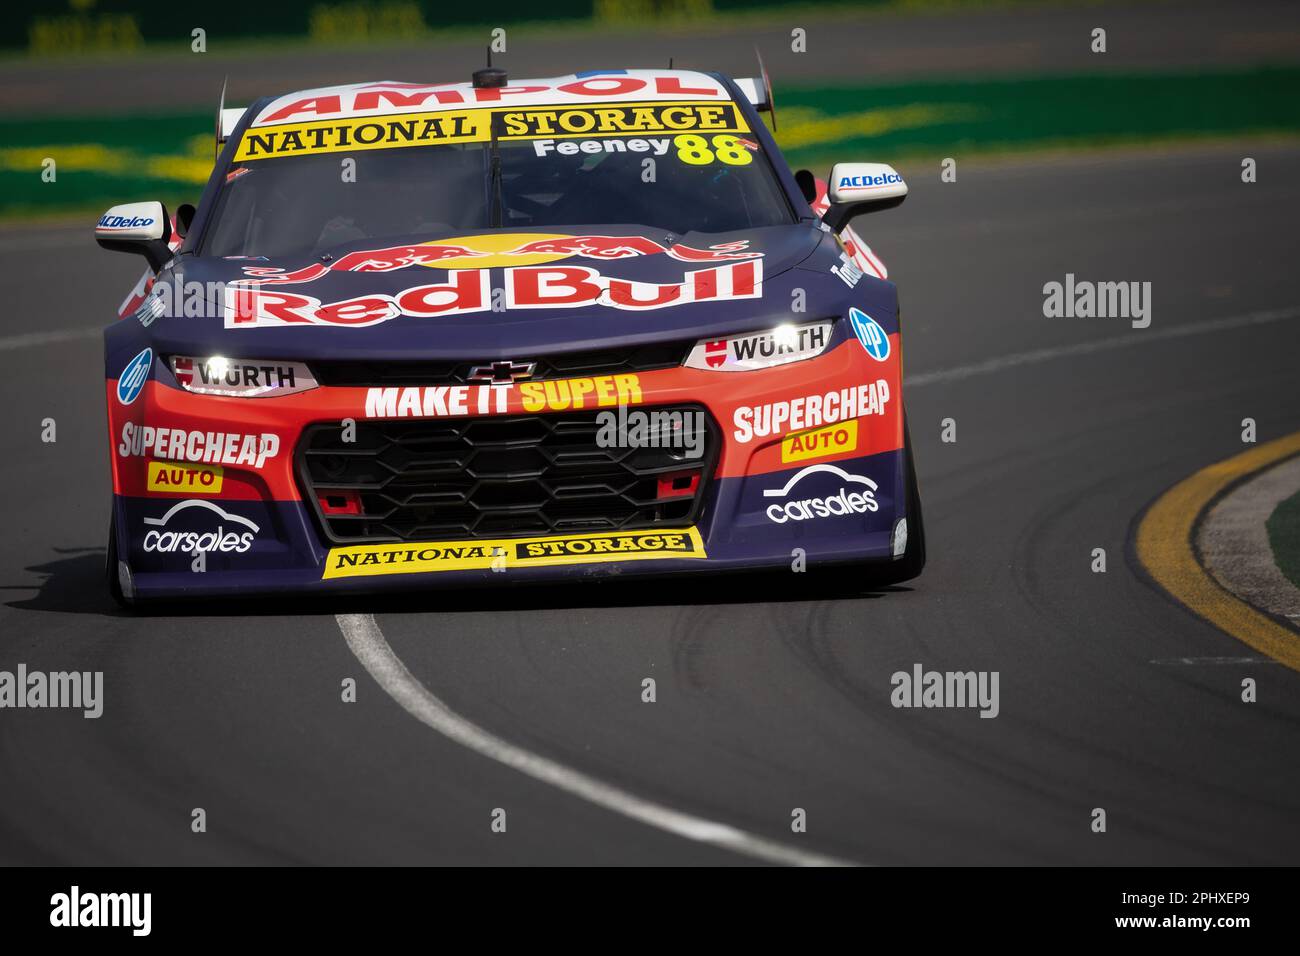 Melbourne, Australia, 30 March, 2023. Broc Feeney (88) driving for Triple Eight Race Engineering during The Australian Formula One Grand Prix on March 30, 2023, at The Melbourne Grand Prix Circuit in Albert Park, Australia. Credit: Dave Hewison/Speed Media/Alamy Live News Stock Photo